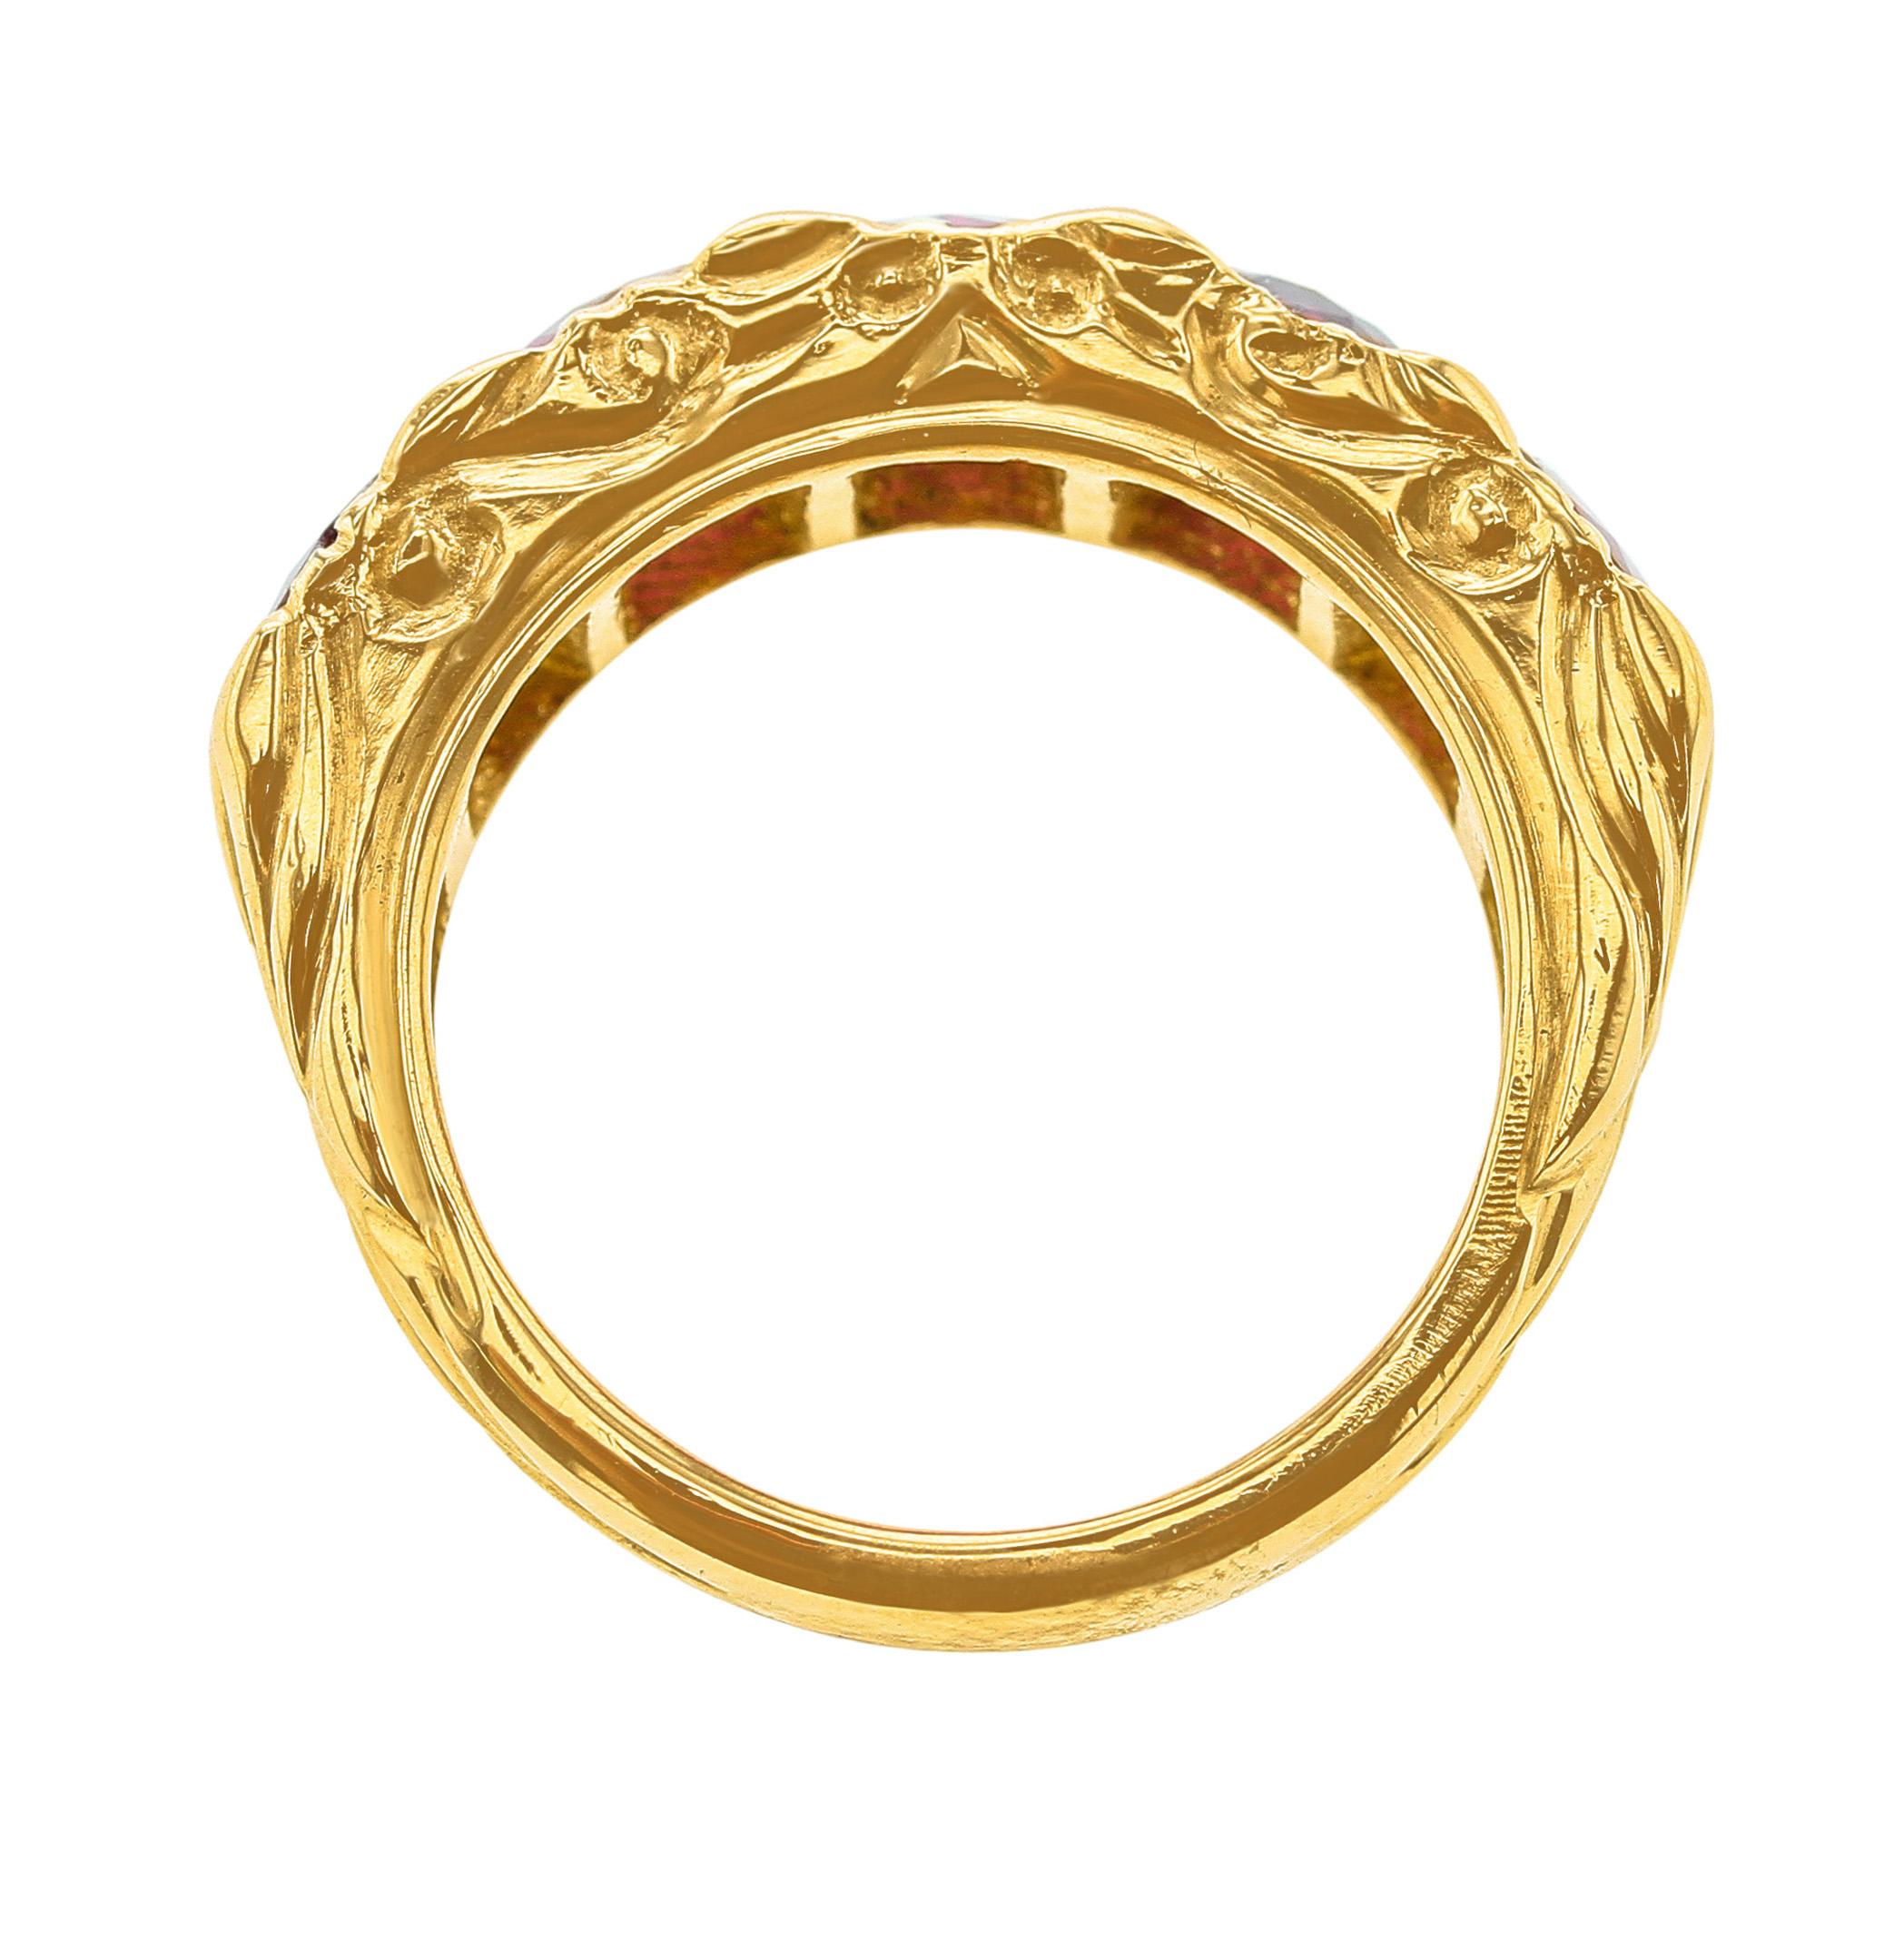 A Horizontal Five Stone Ruby Band in 18K Yellow Gold with a decorative antique-style mounting. Each ruby is appx. 0.58 carats. Ring Size US 6.25. 